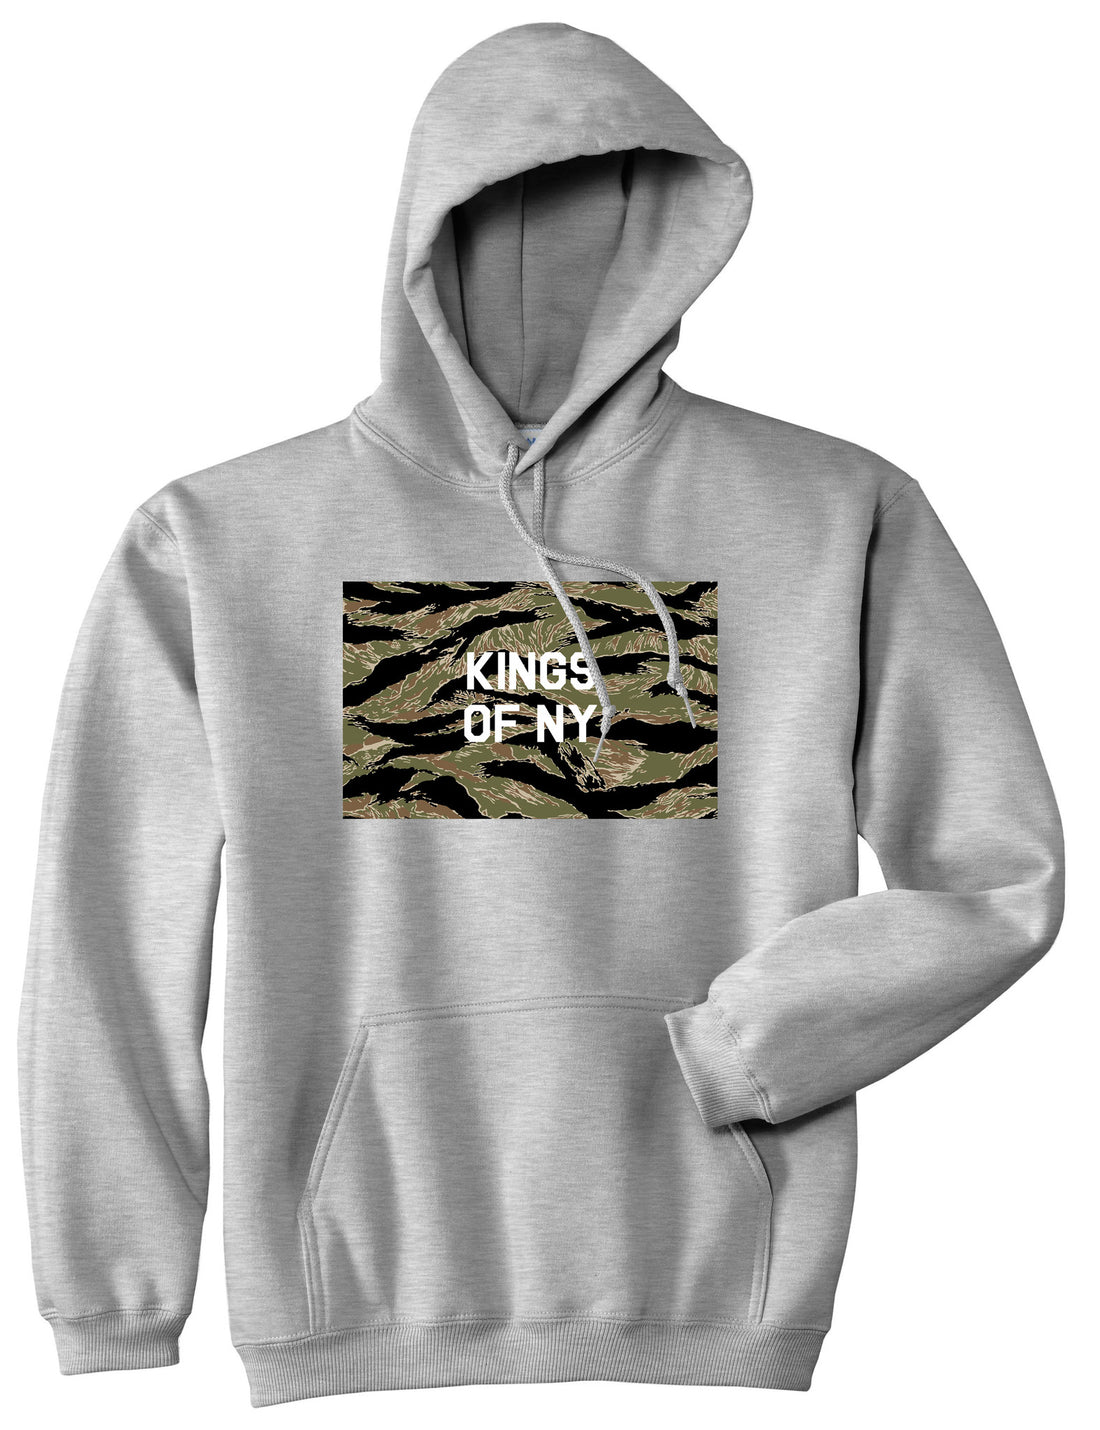 Tiger Stripe Camo Army Pullover Hoodie in Grey